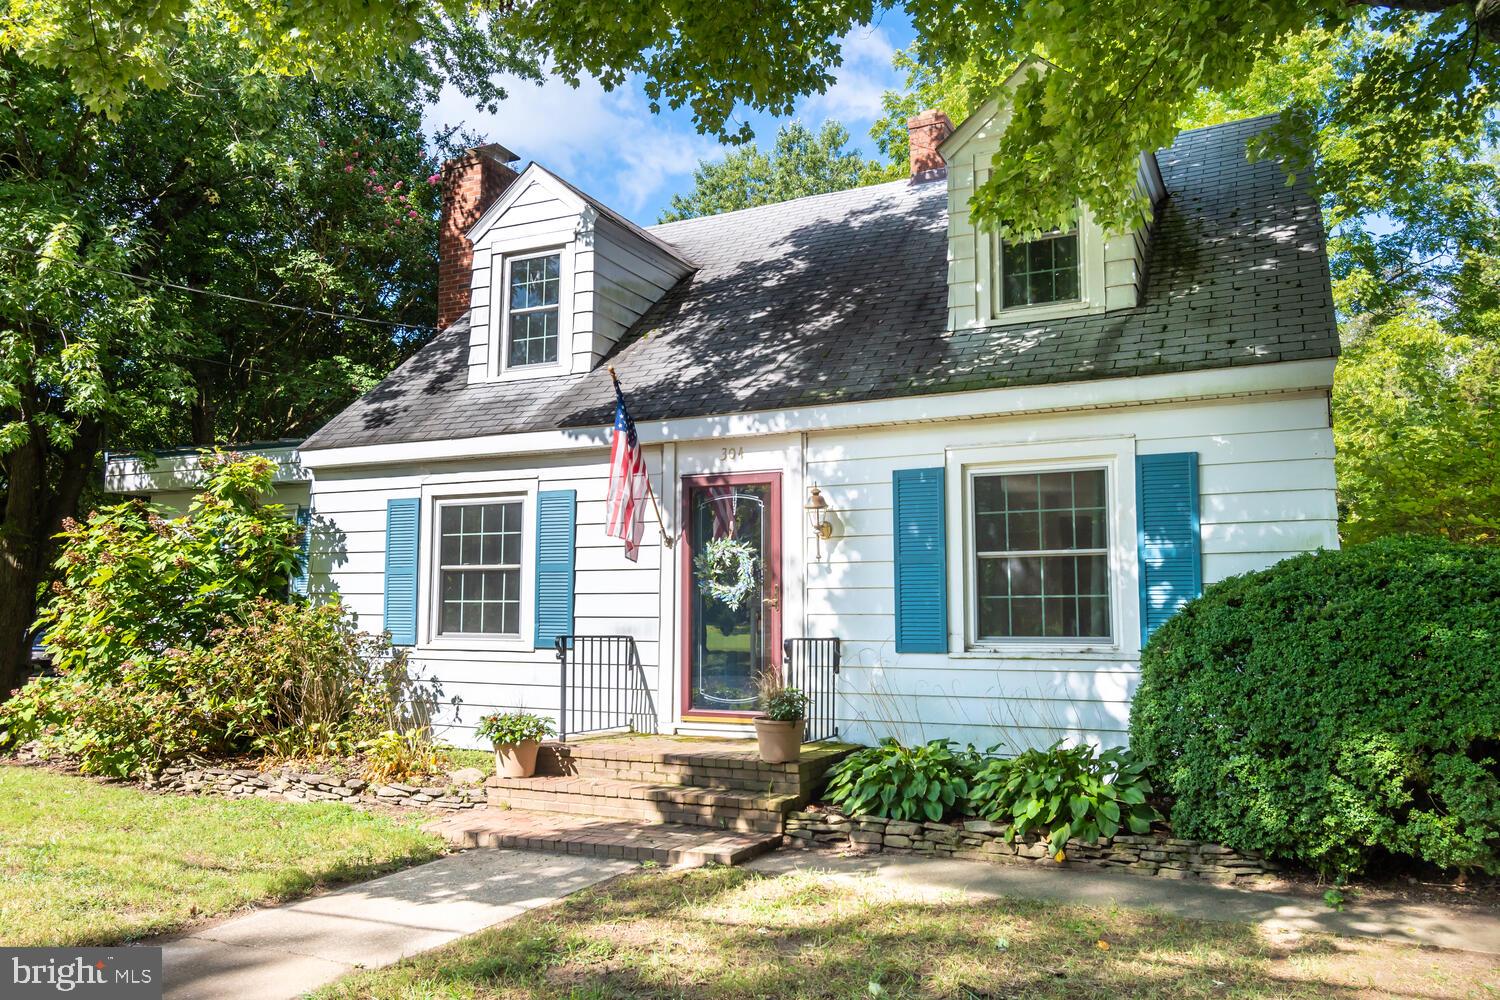 OPEN HOUSE SEPT 10 FROM 11:00 TO 2:00.  Adorable Cape Cod in the desirable area of Kingstown, Cheste